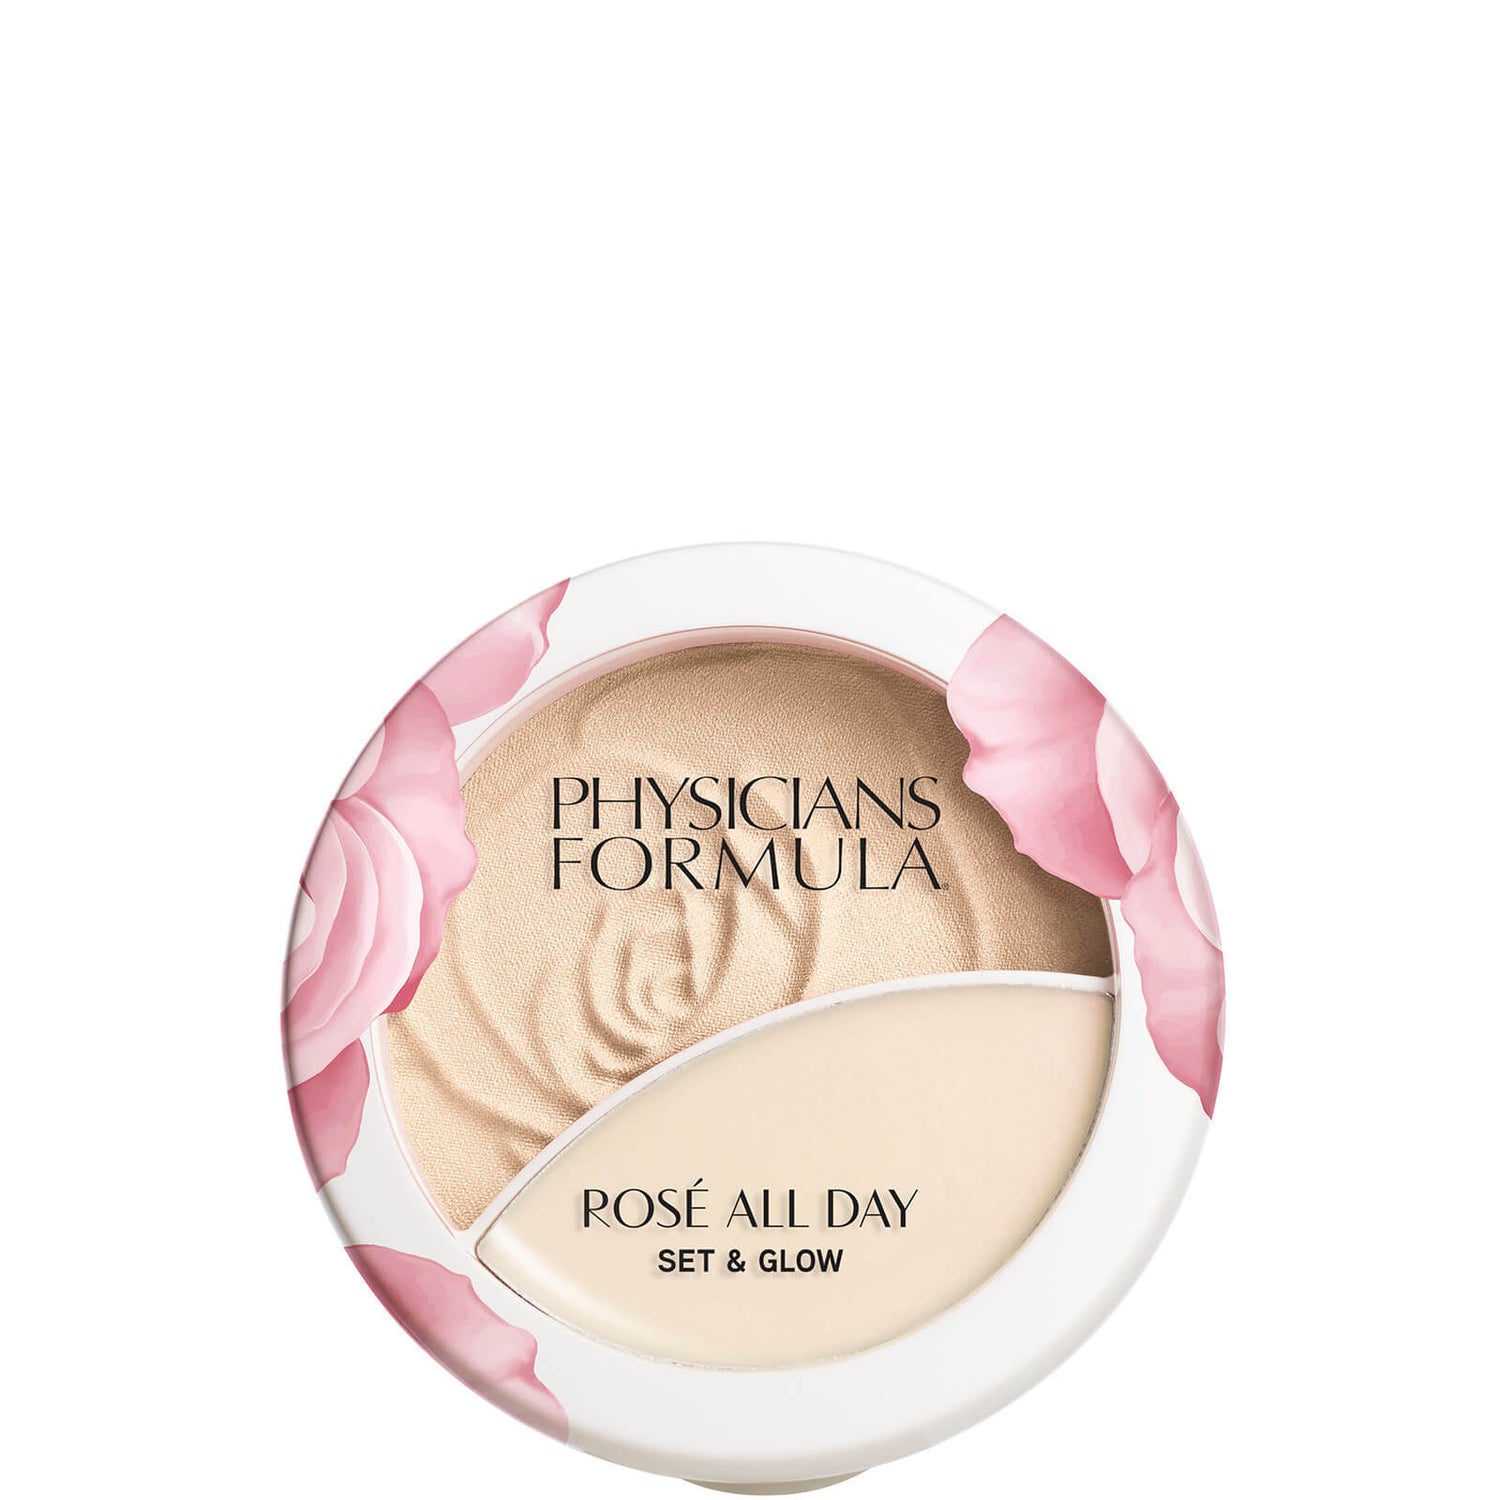 Physicians Formula Rosé All Day Set and Glow 8.3g (Various Shades)